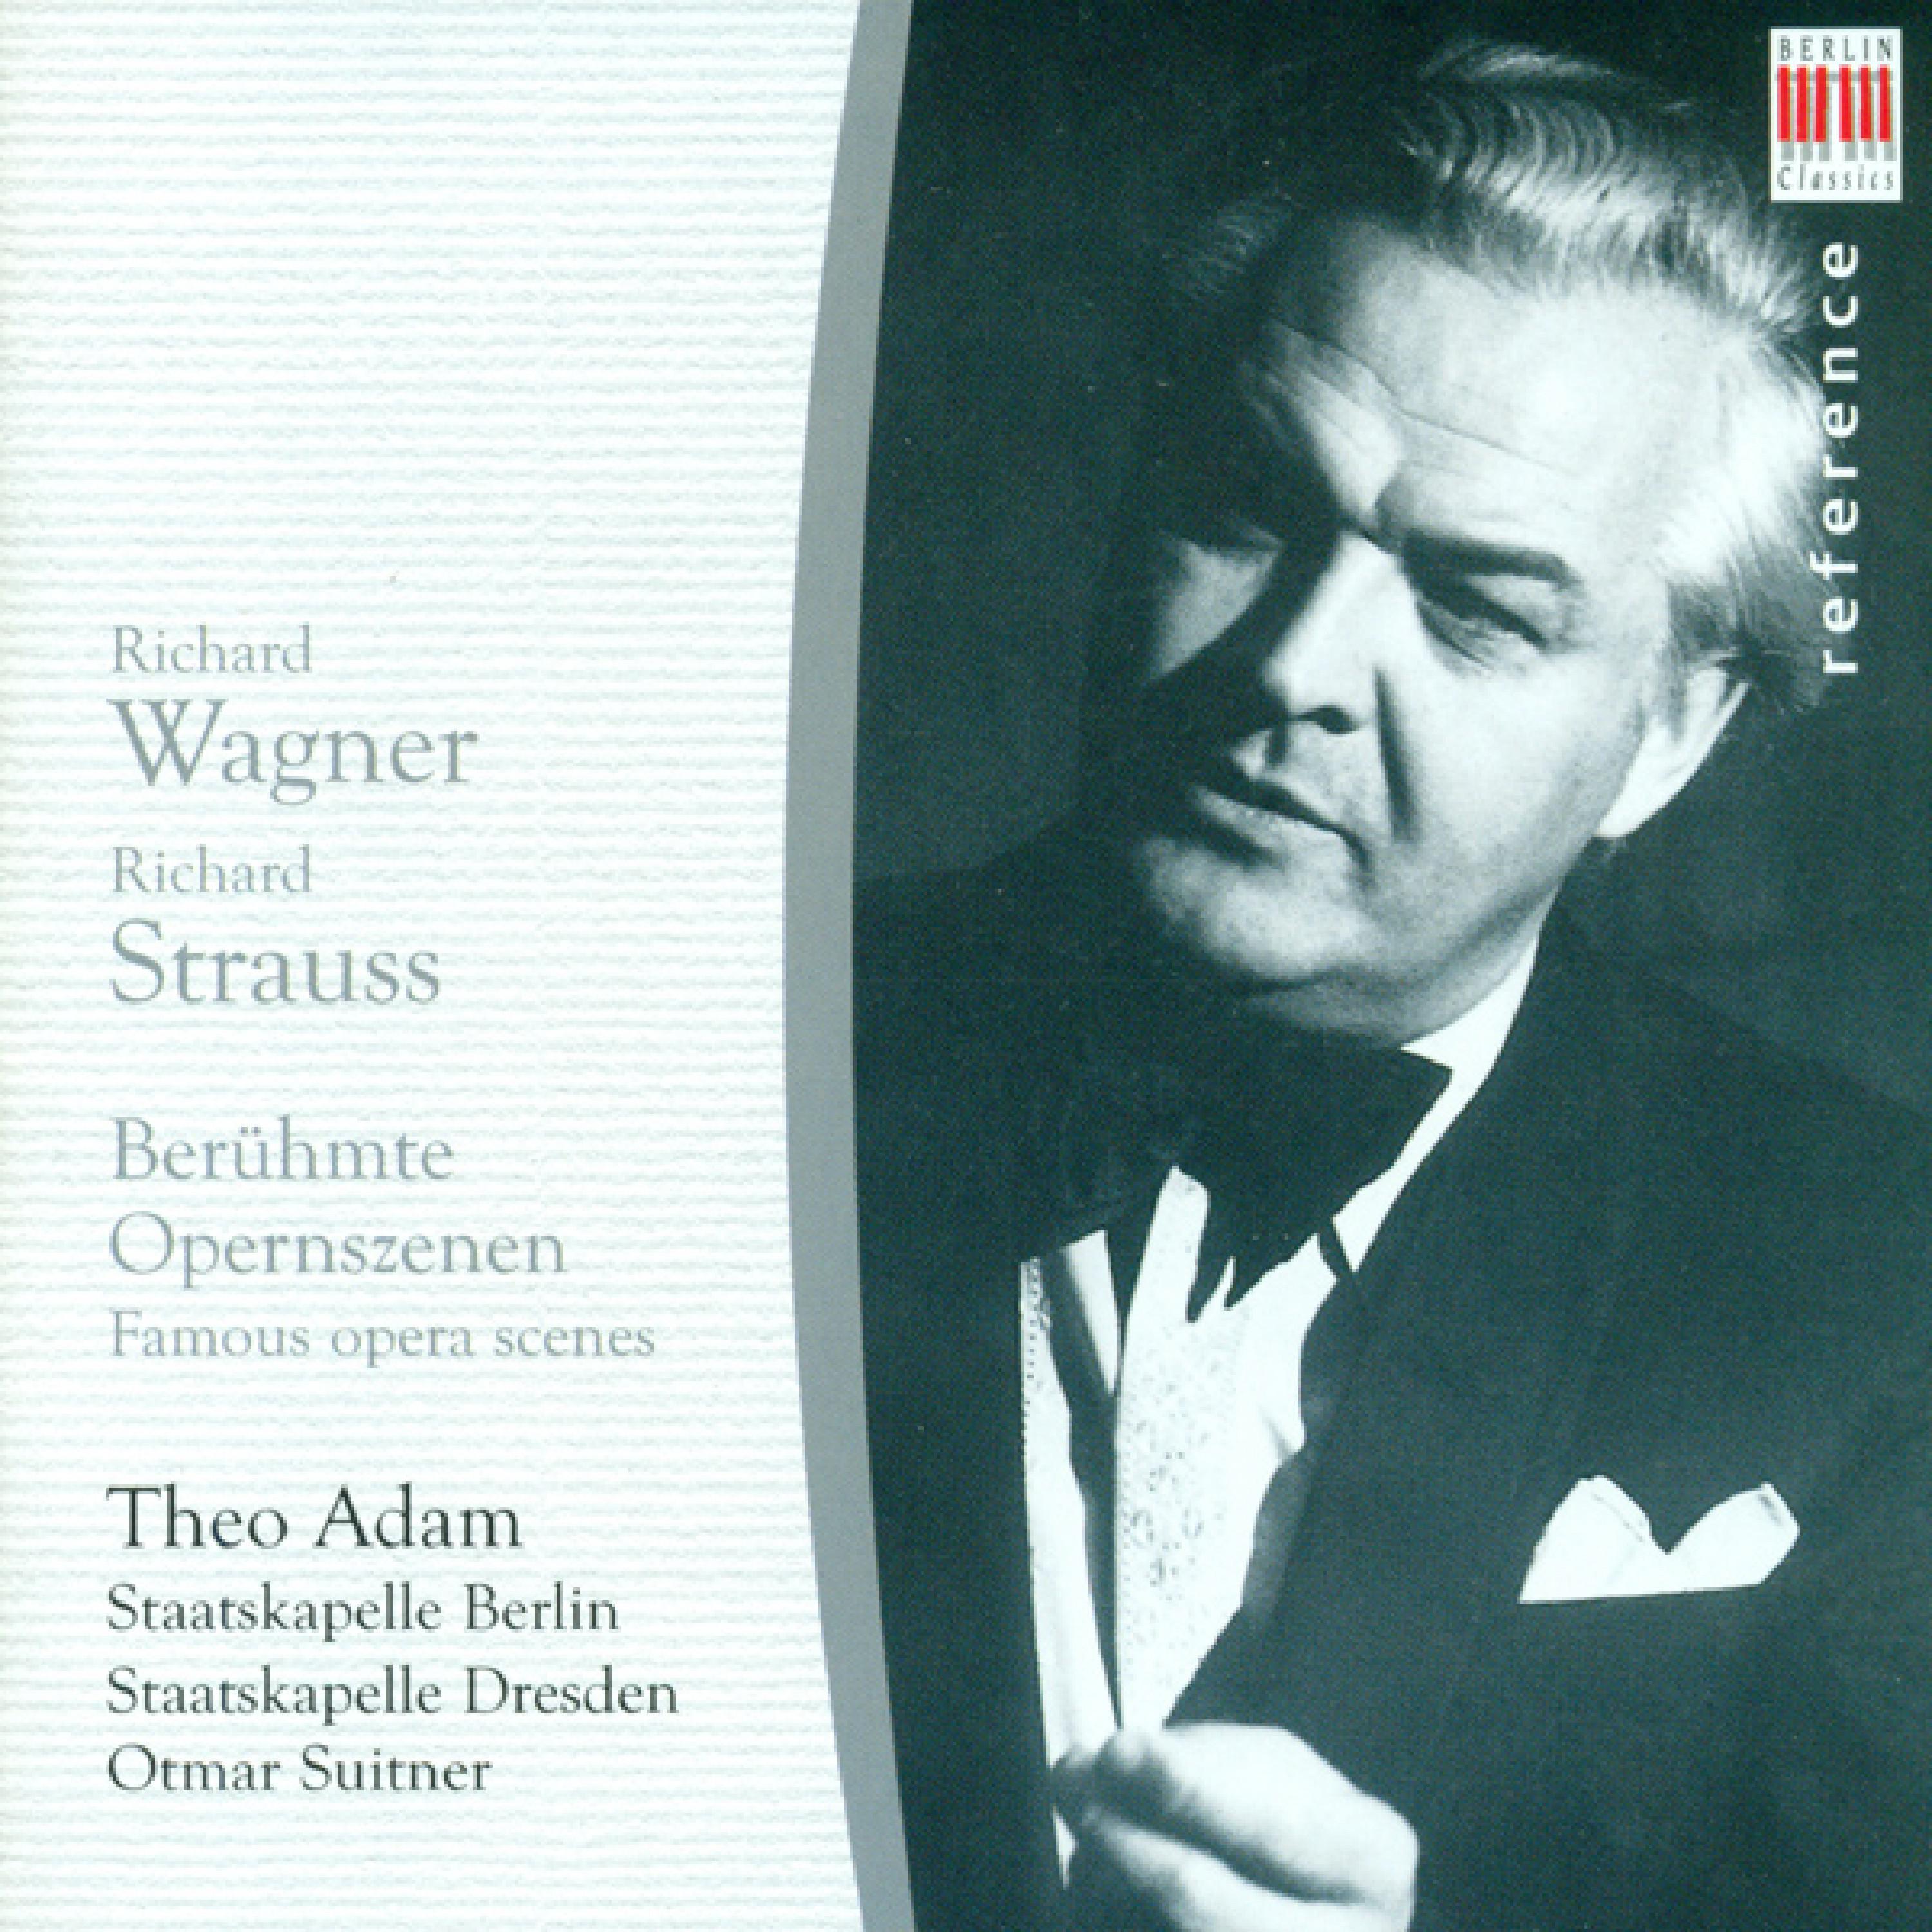 Wagner & Strauss: Famous opera scenes